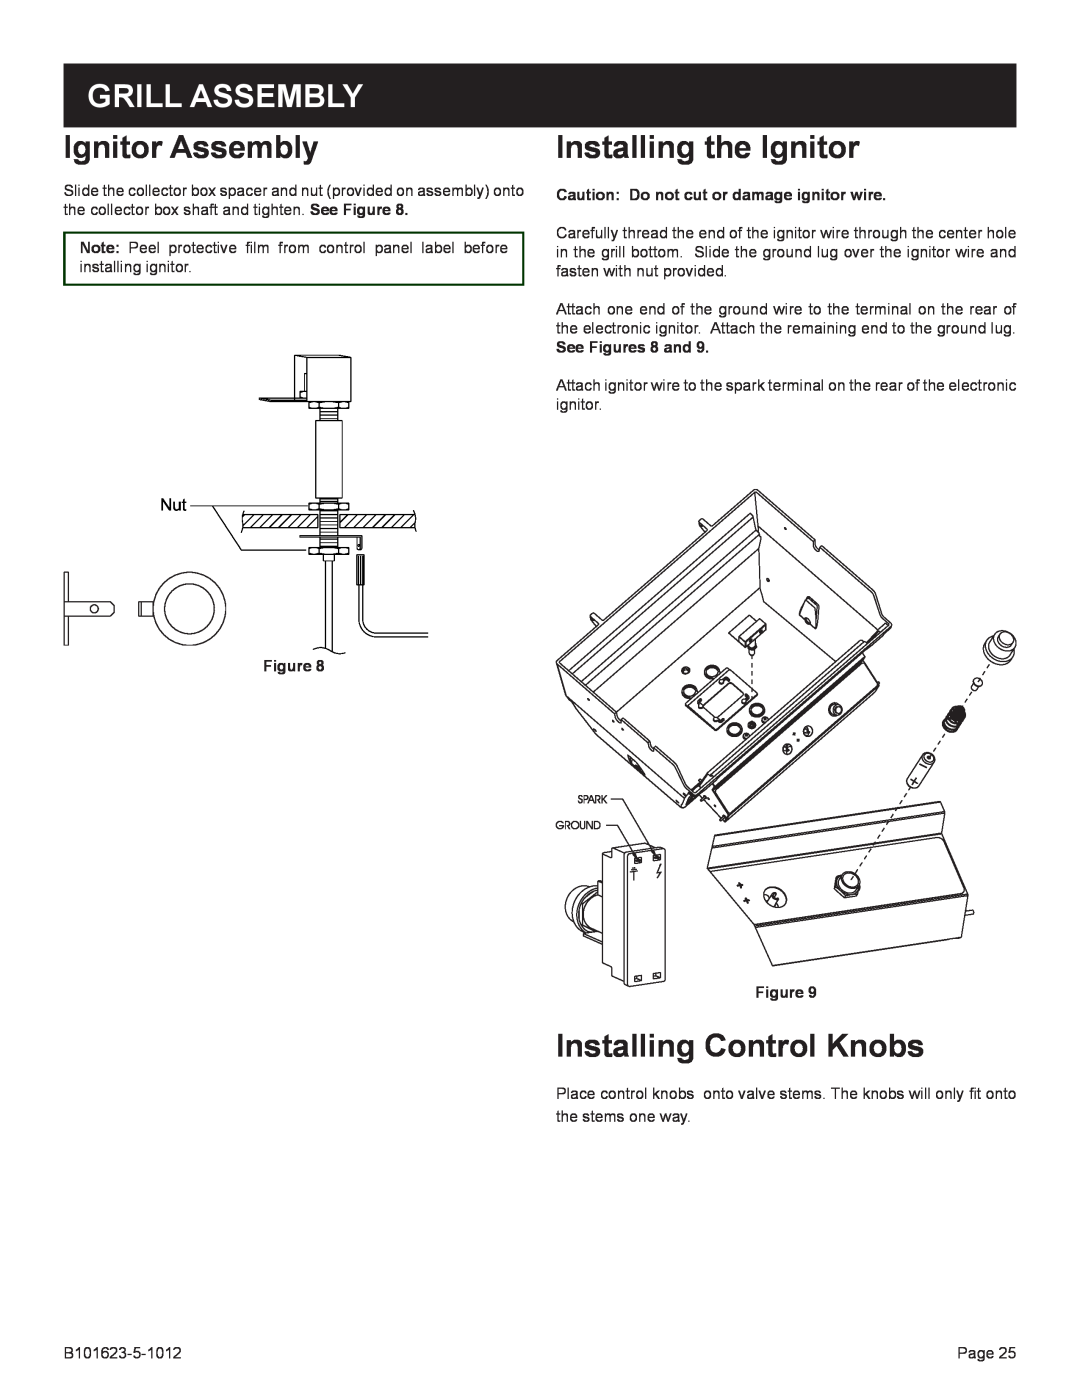 Broilmaster P4XFN-1, R3-1 manual Ignitor Assembly, Installing the Ignitor, Installing Control Knobs, Grill Assembly 